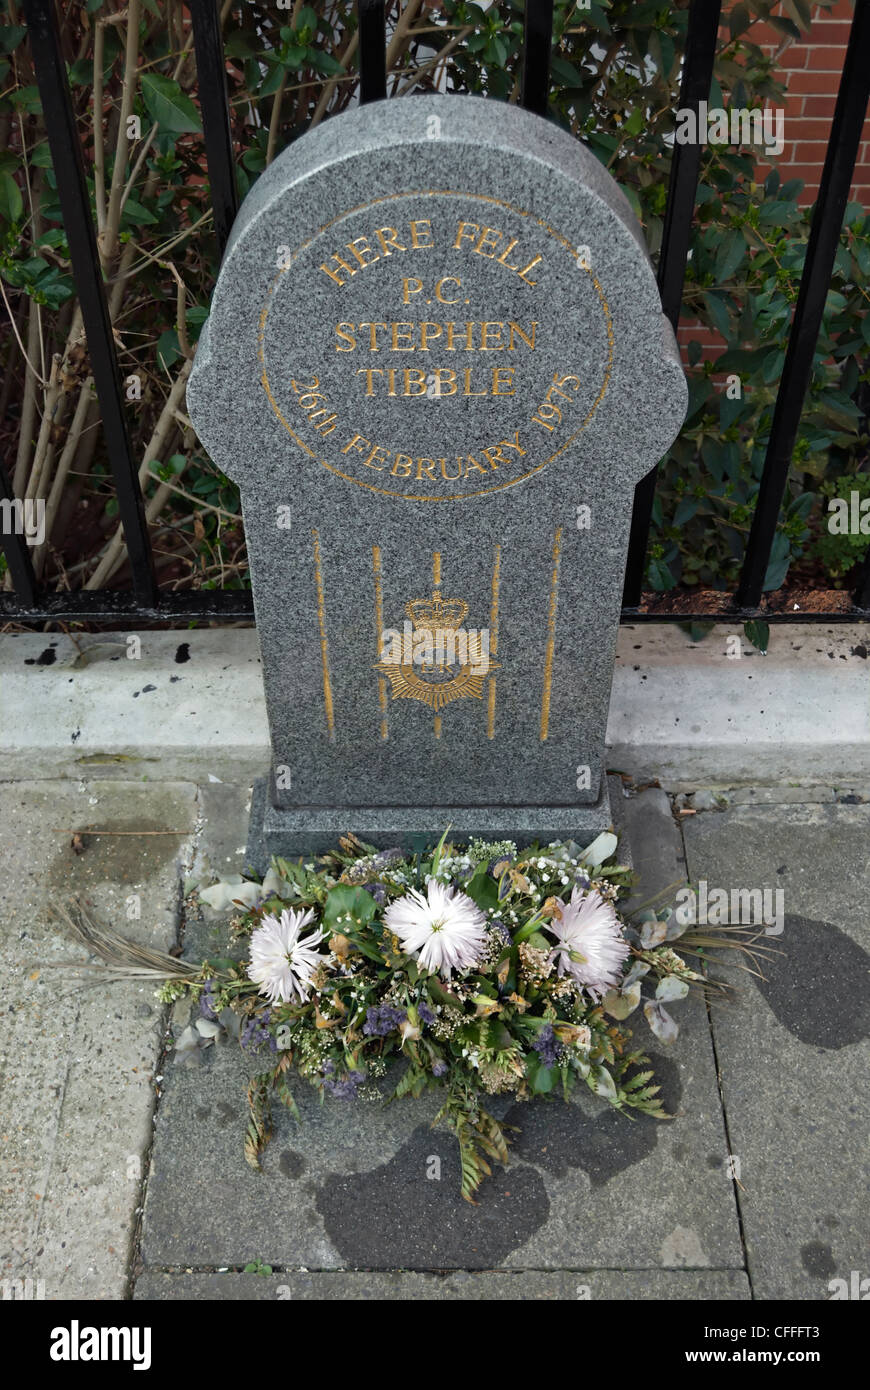 metropolitan police memorial to constable stephen tibble, killed while pursuing a suspect in february 1975, london, england Stock Photo